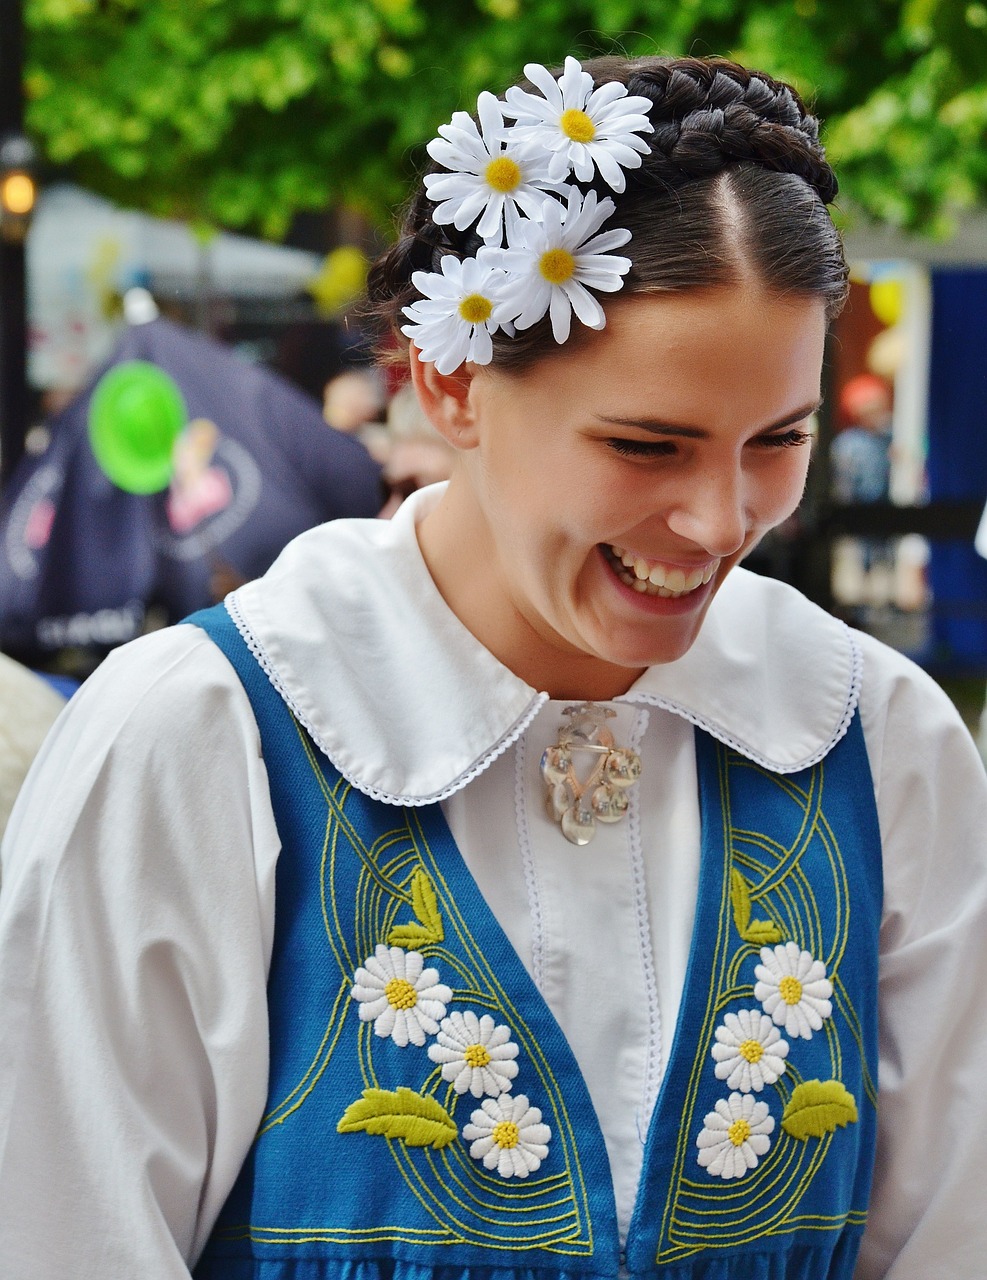 laughing girl sweden free photo